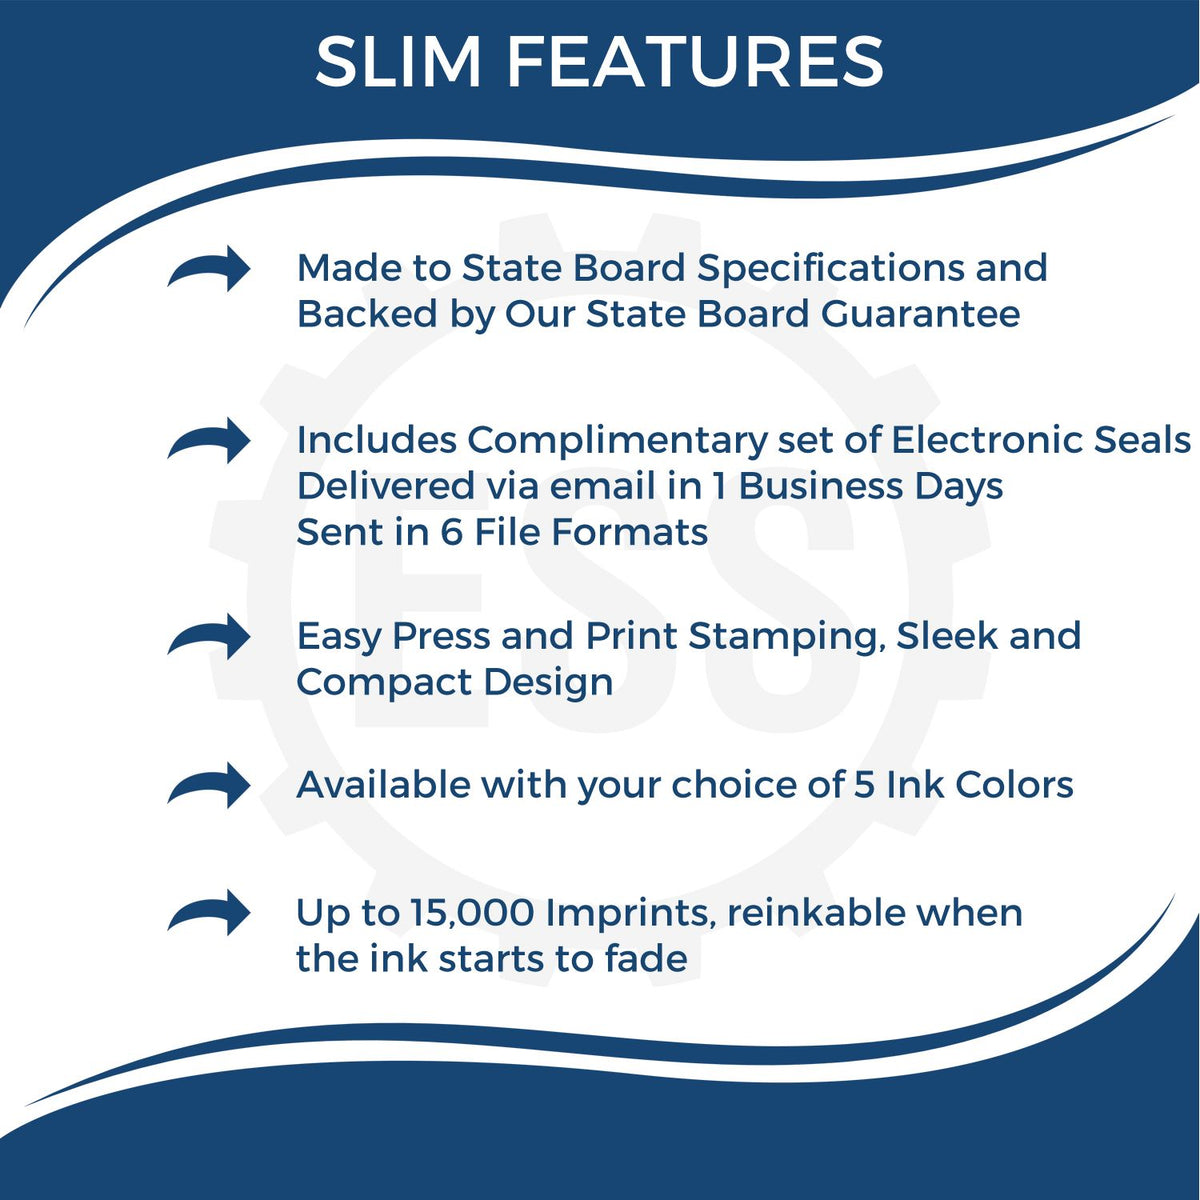 A picture of an infographic highlighting the selling points for the Slim Pre-Inked Nevada Landscape Architect Seal Stamp